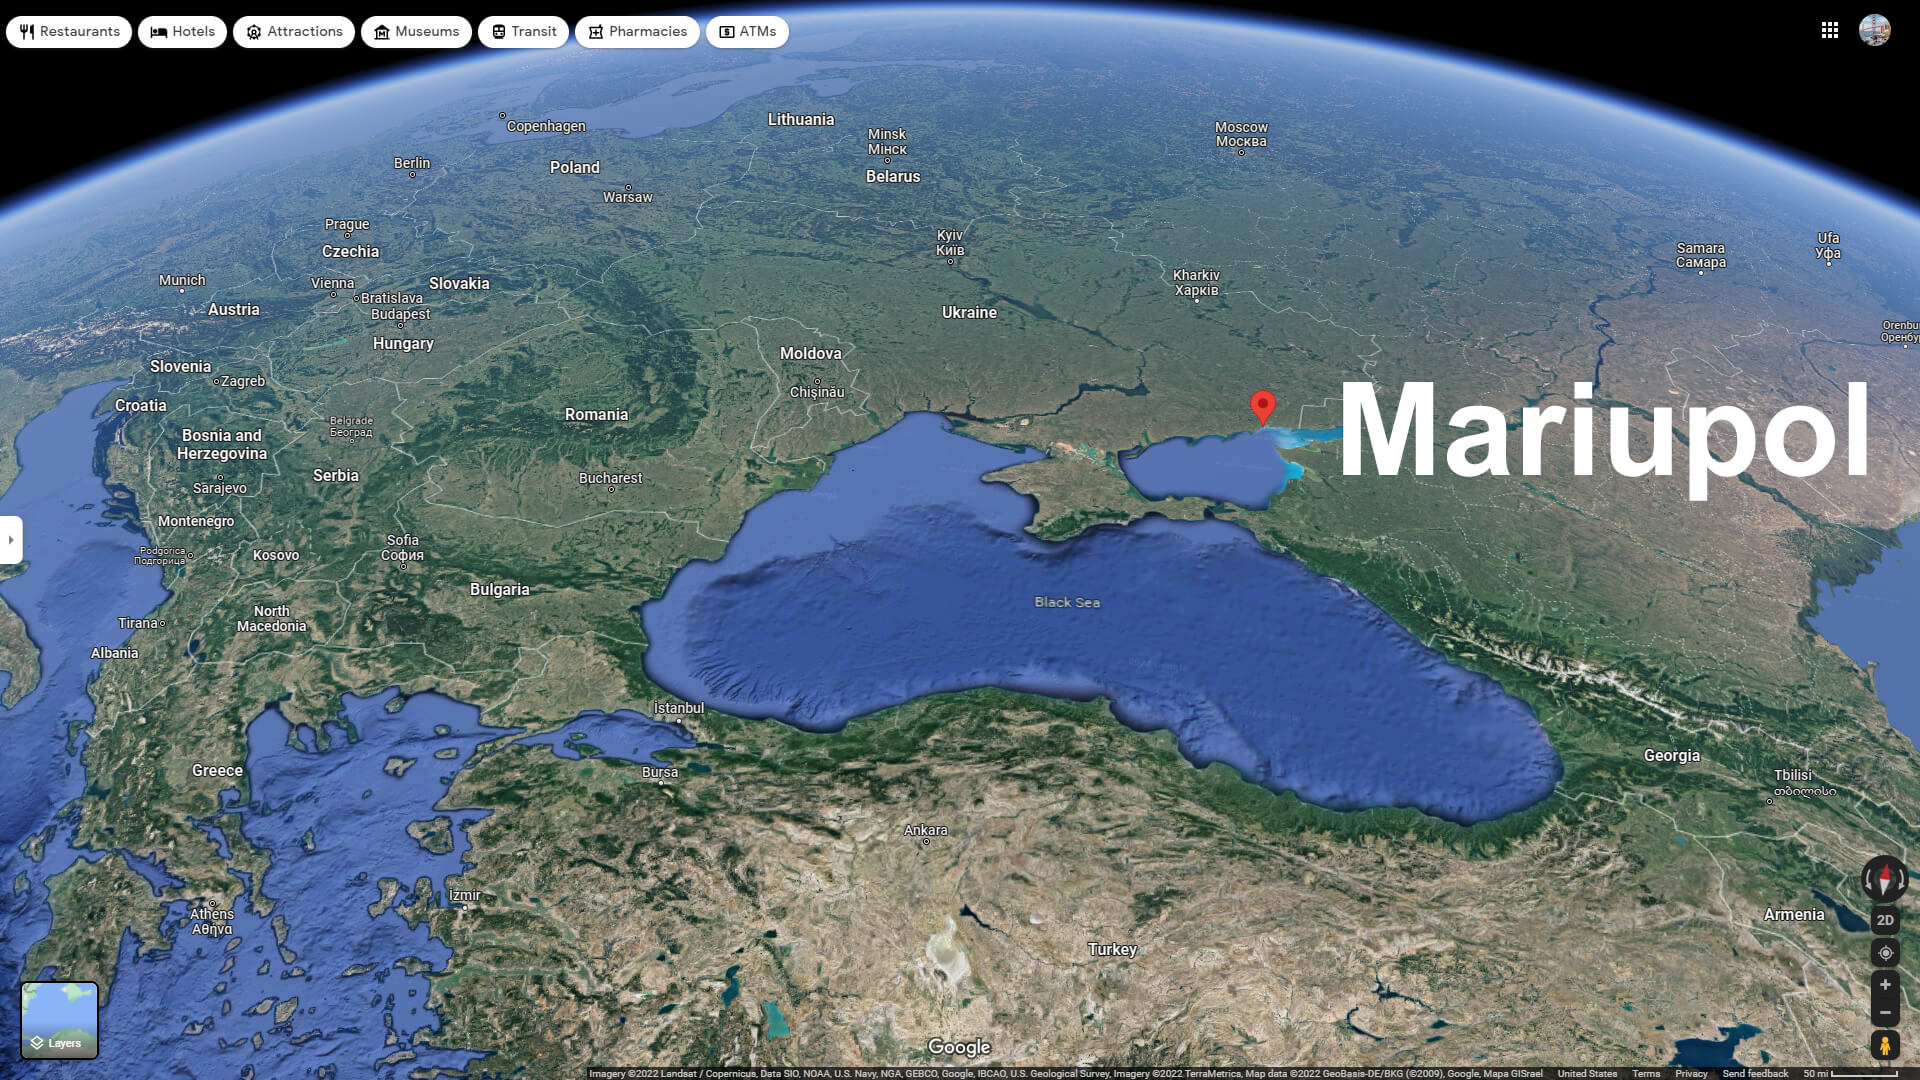 Where is Located Mariupol in the World